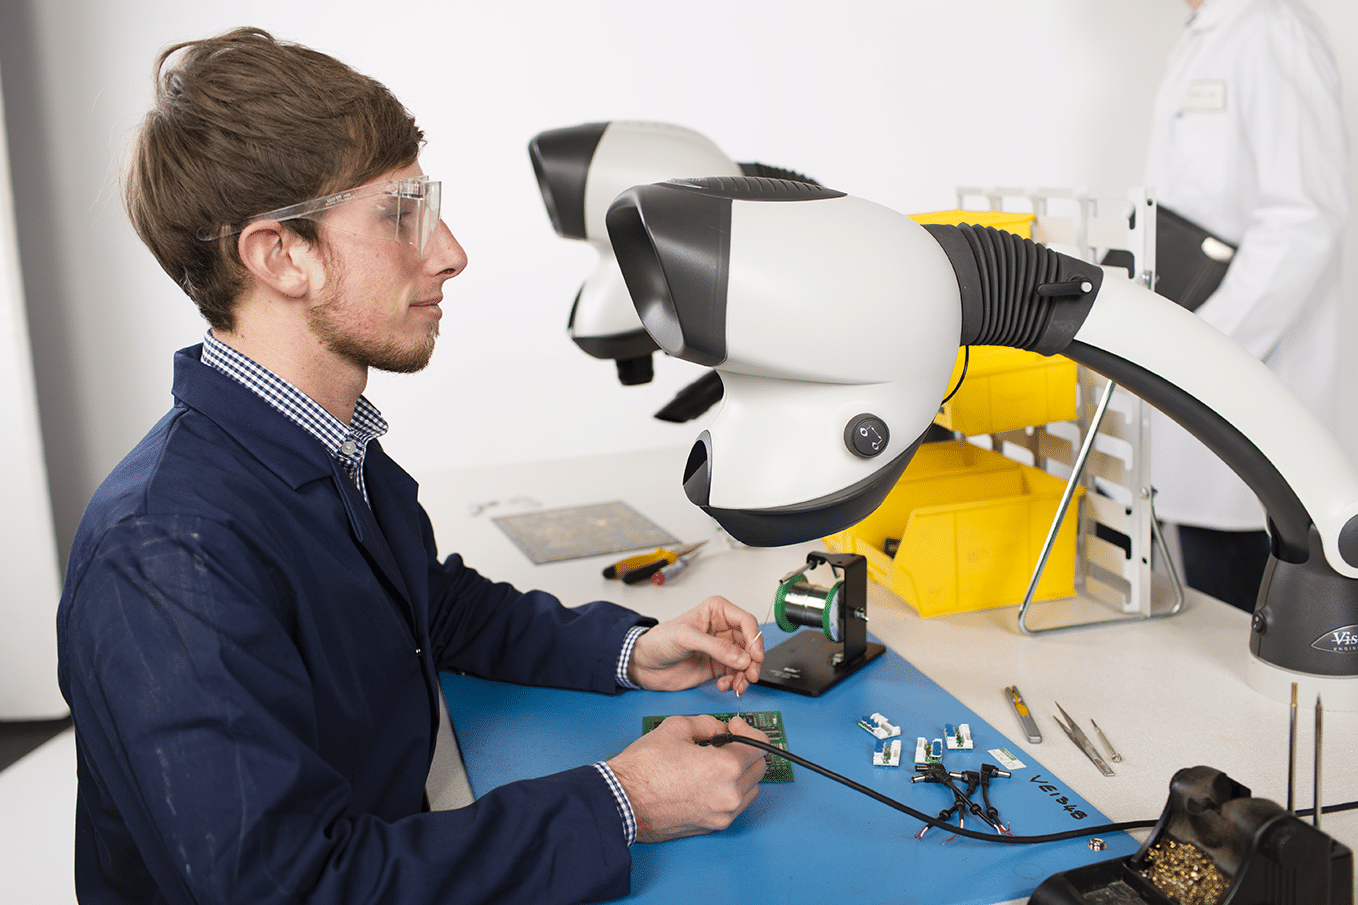 A man soldering an electronics part using Mantis microscope